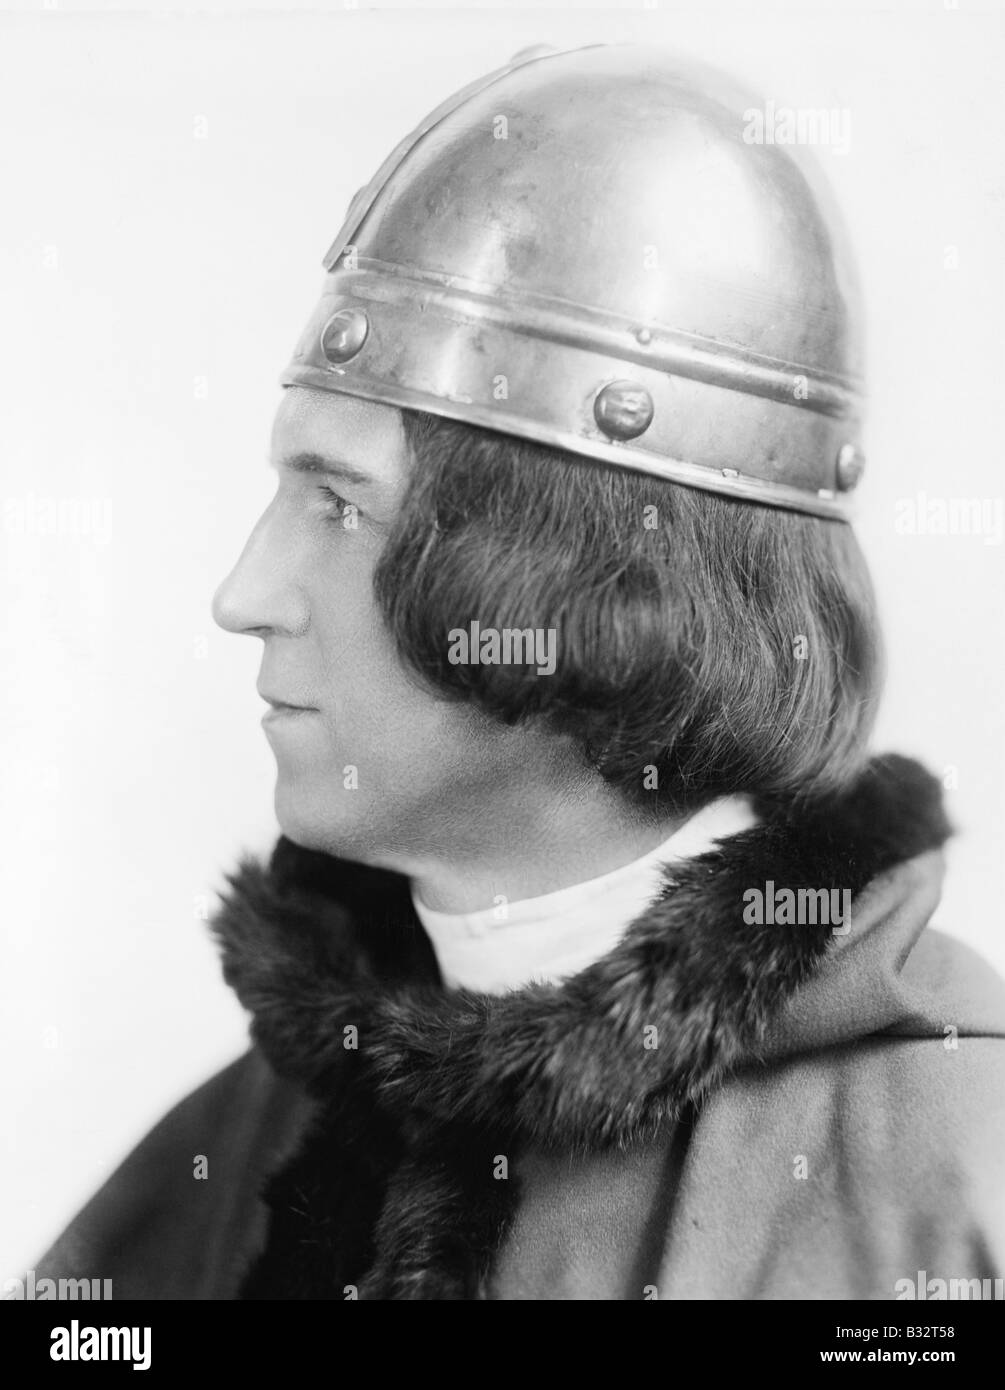 Portrait of a man in costume and a helmet looking away Stock Photo